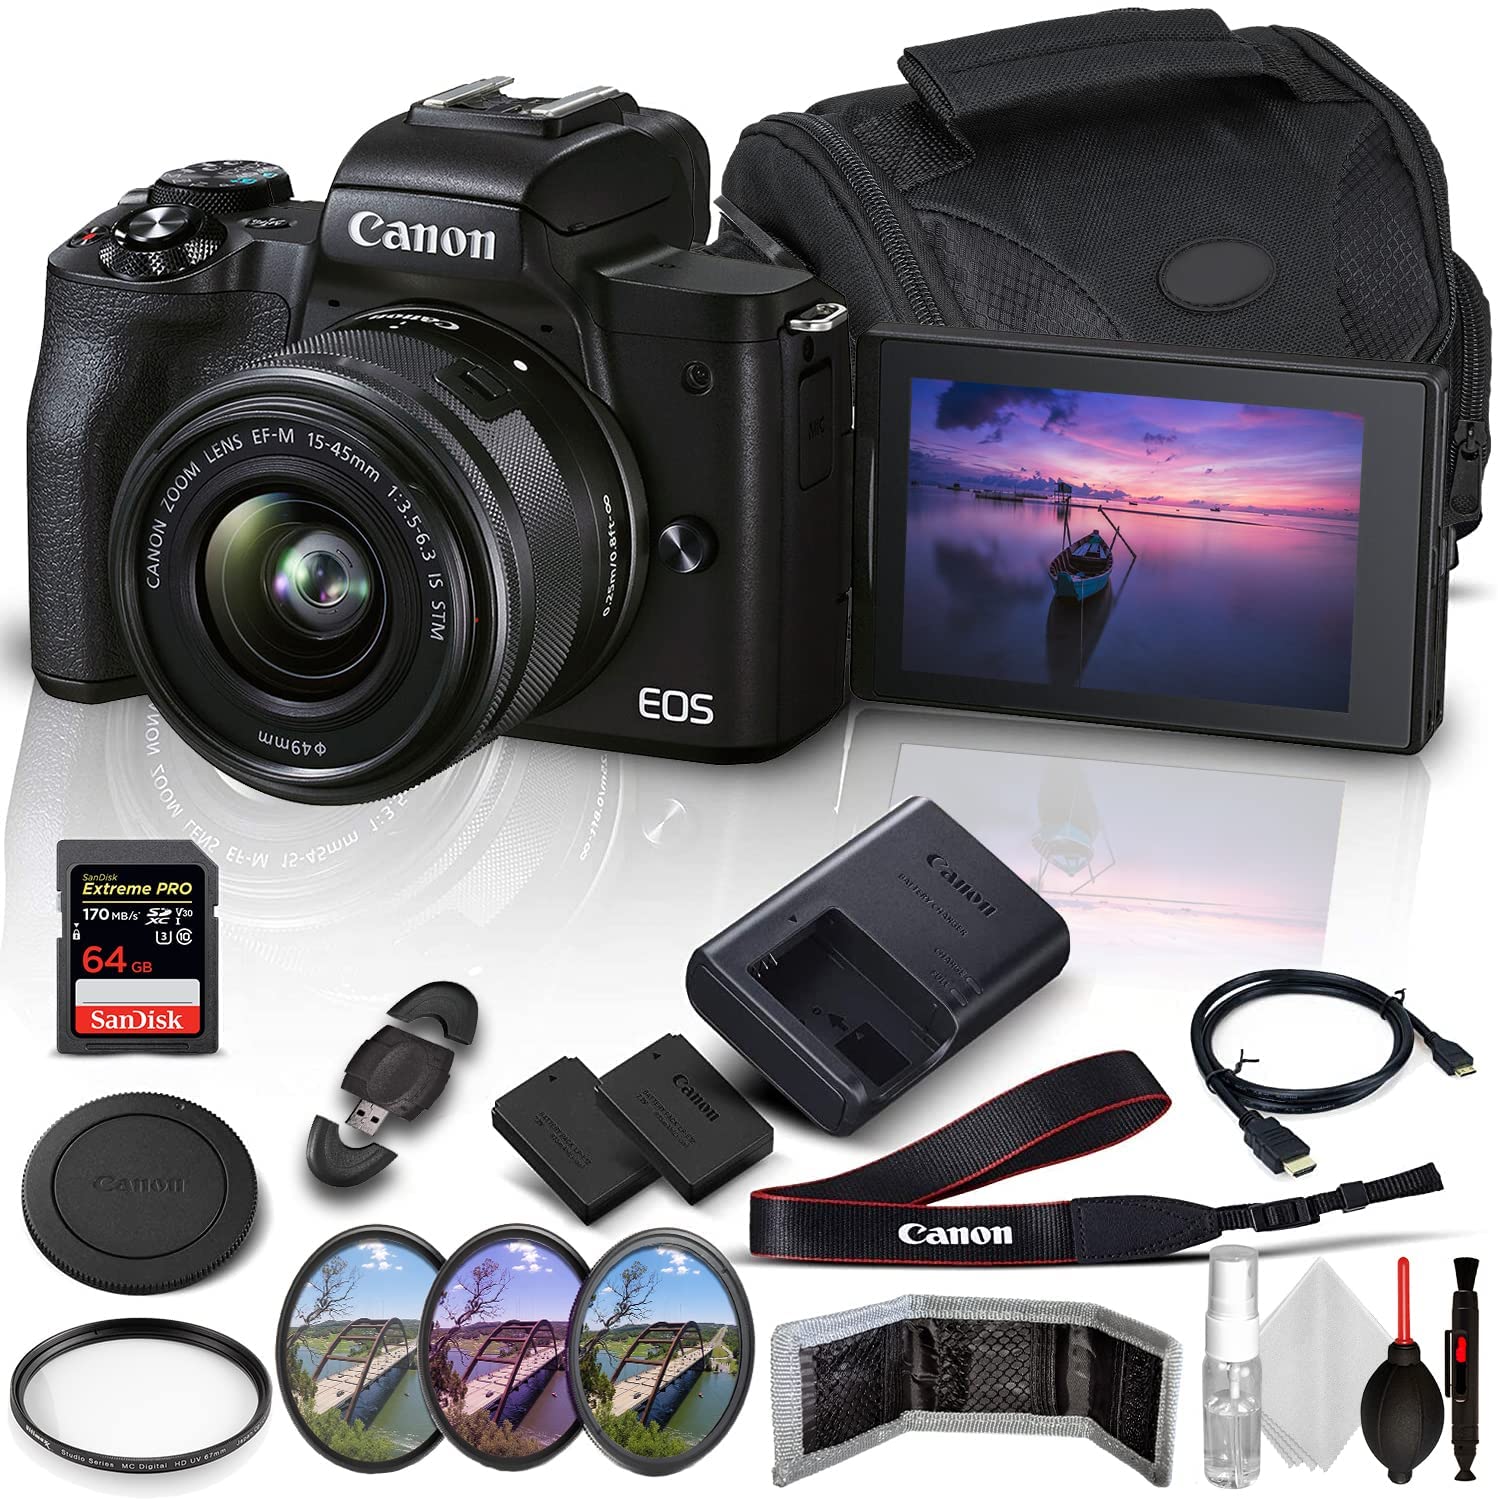 Canon EOS M50 Mark II Mirrorless Digital Camera with 15-45mm Lens (Black) + SanDisk Extreme PRO 64GB Memory Card + Extended Life Spare Battery + Case + 3PC Filter Set + HDMI Cable + More (18pc Bundle)